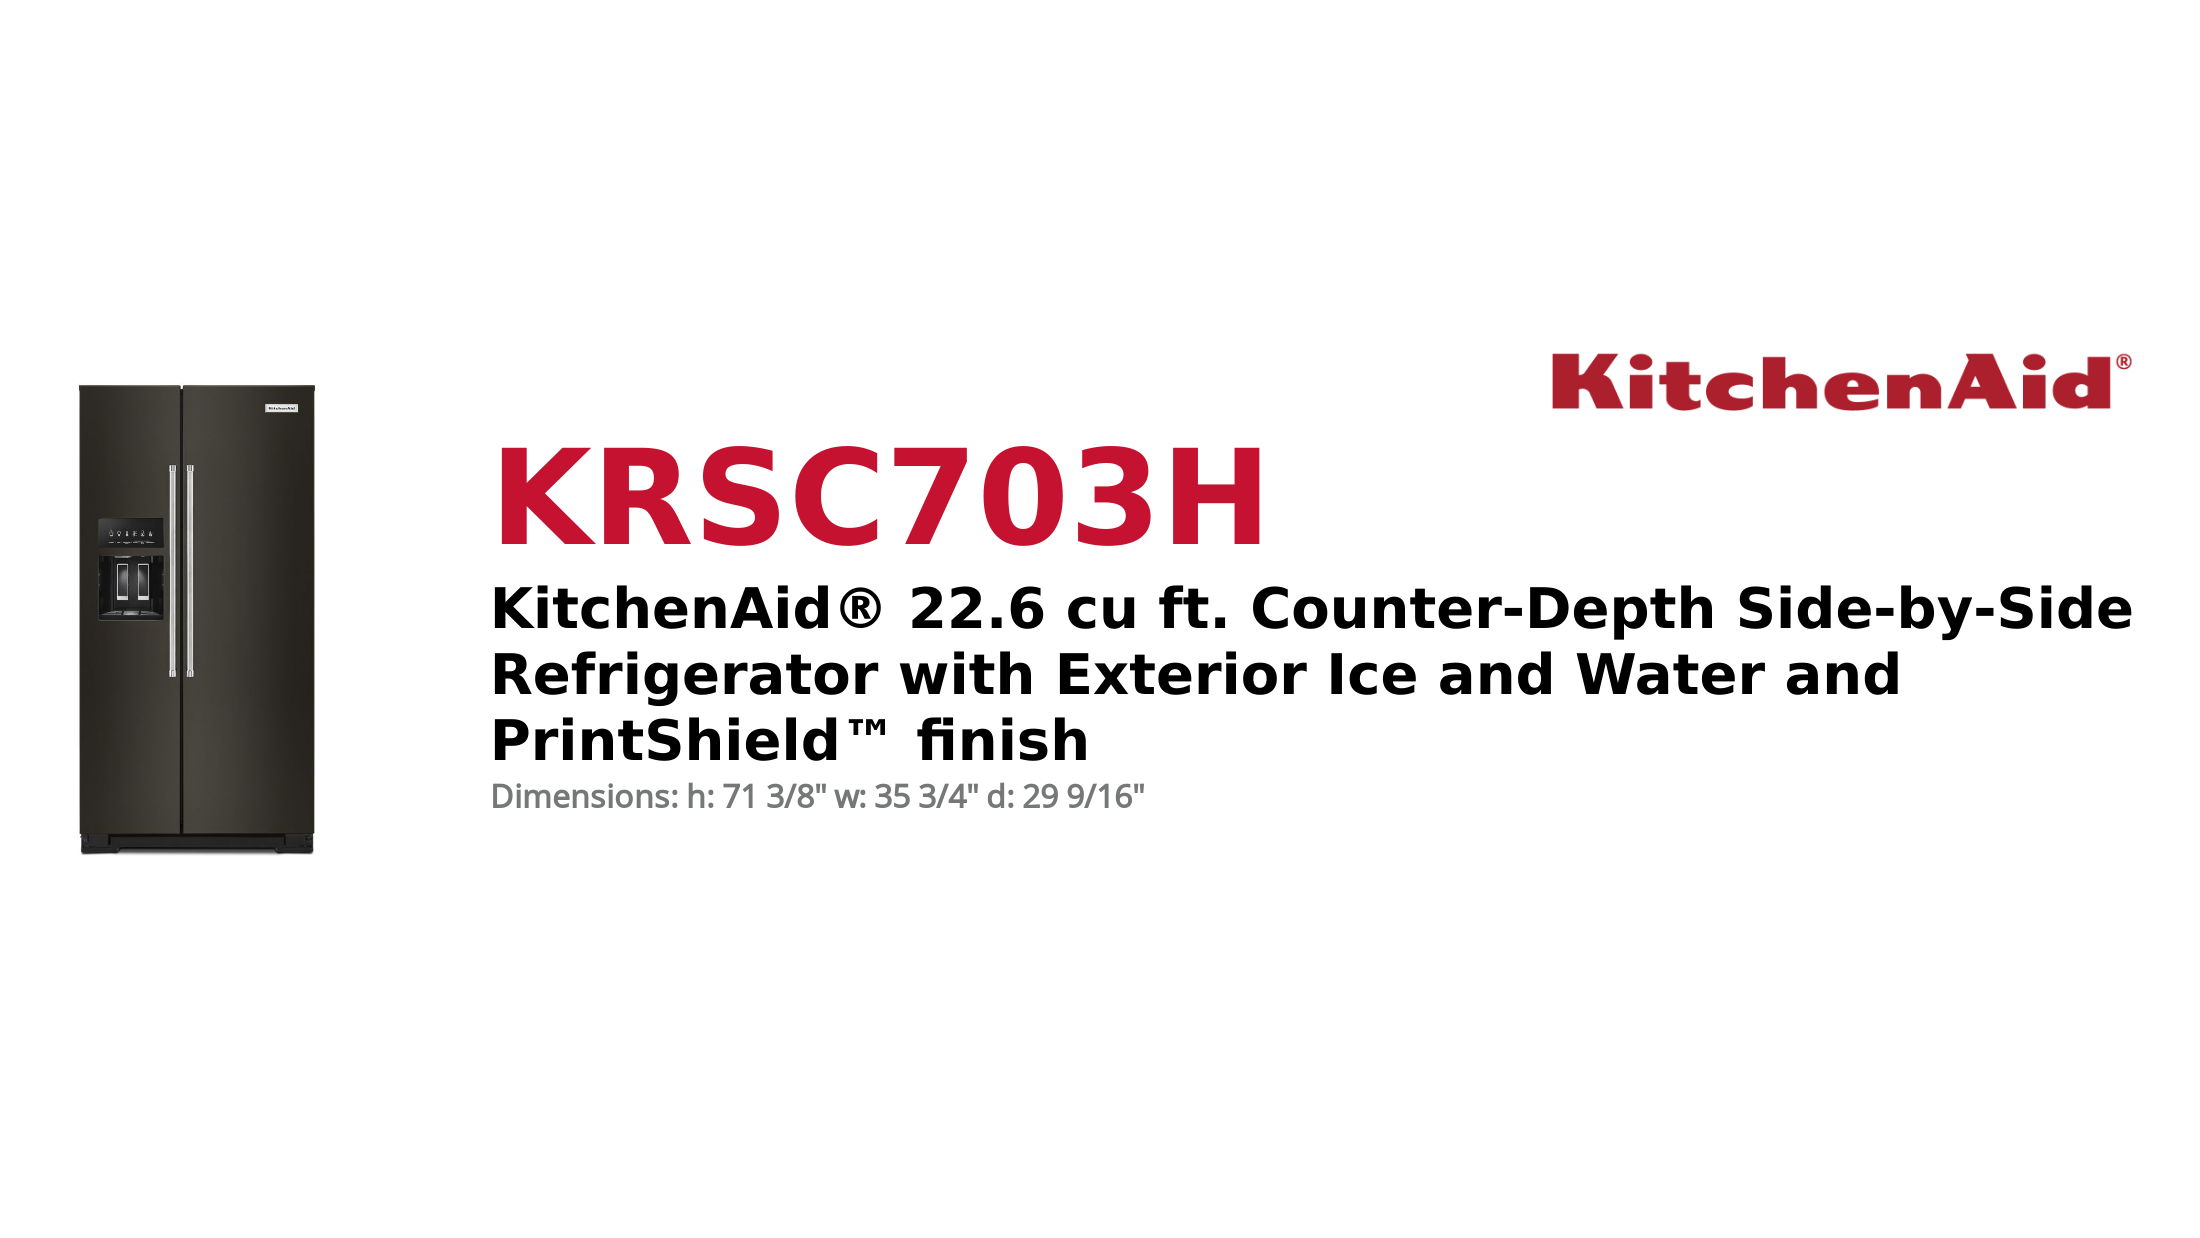 KitchenAid® 22.6 cu ft. Counter-Depth Side-by-Side Refrigerator with Exterior Ice and Water and PrintShield™ finish